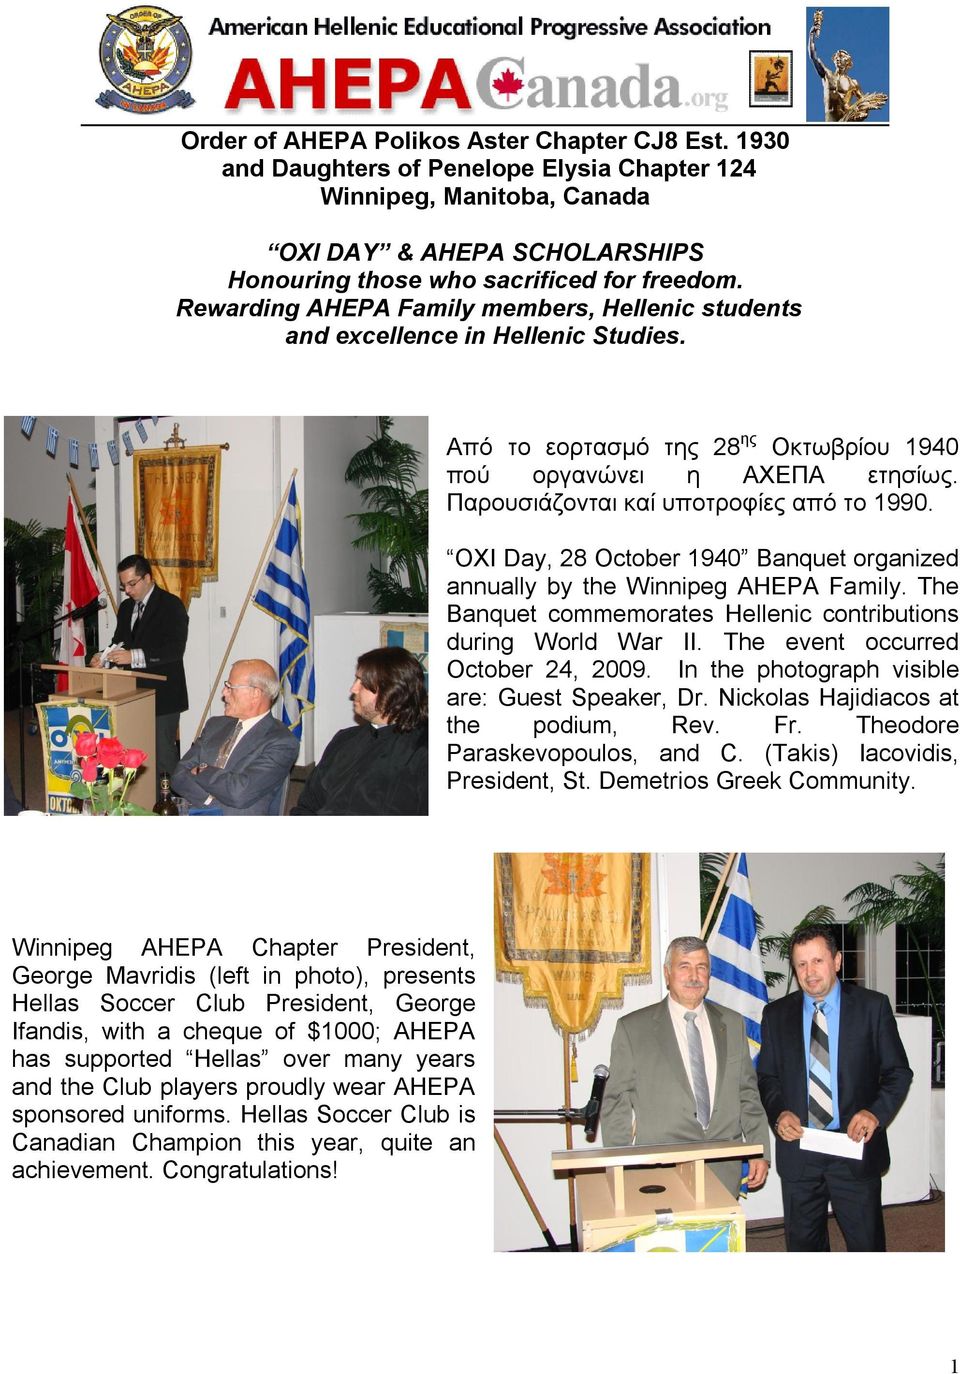 OXI Day, 28 October 1940 Banquet organized annually by the Winnipeg AHEPA Family. The Banquet commemorates Hellenic contributions during World War II. The event occurred October 24, 2009.